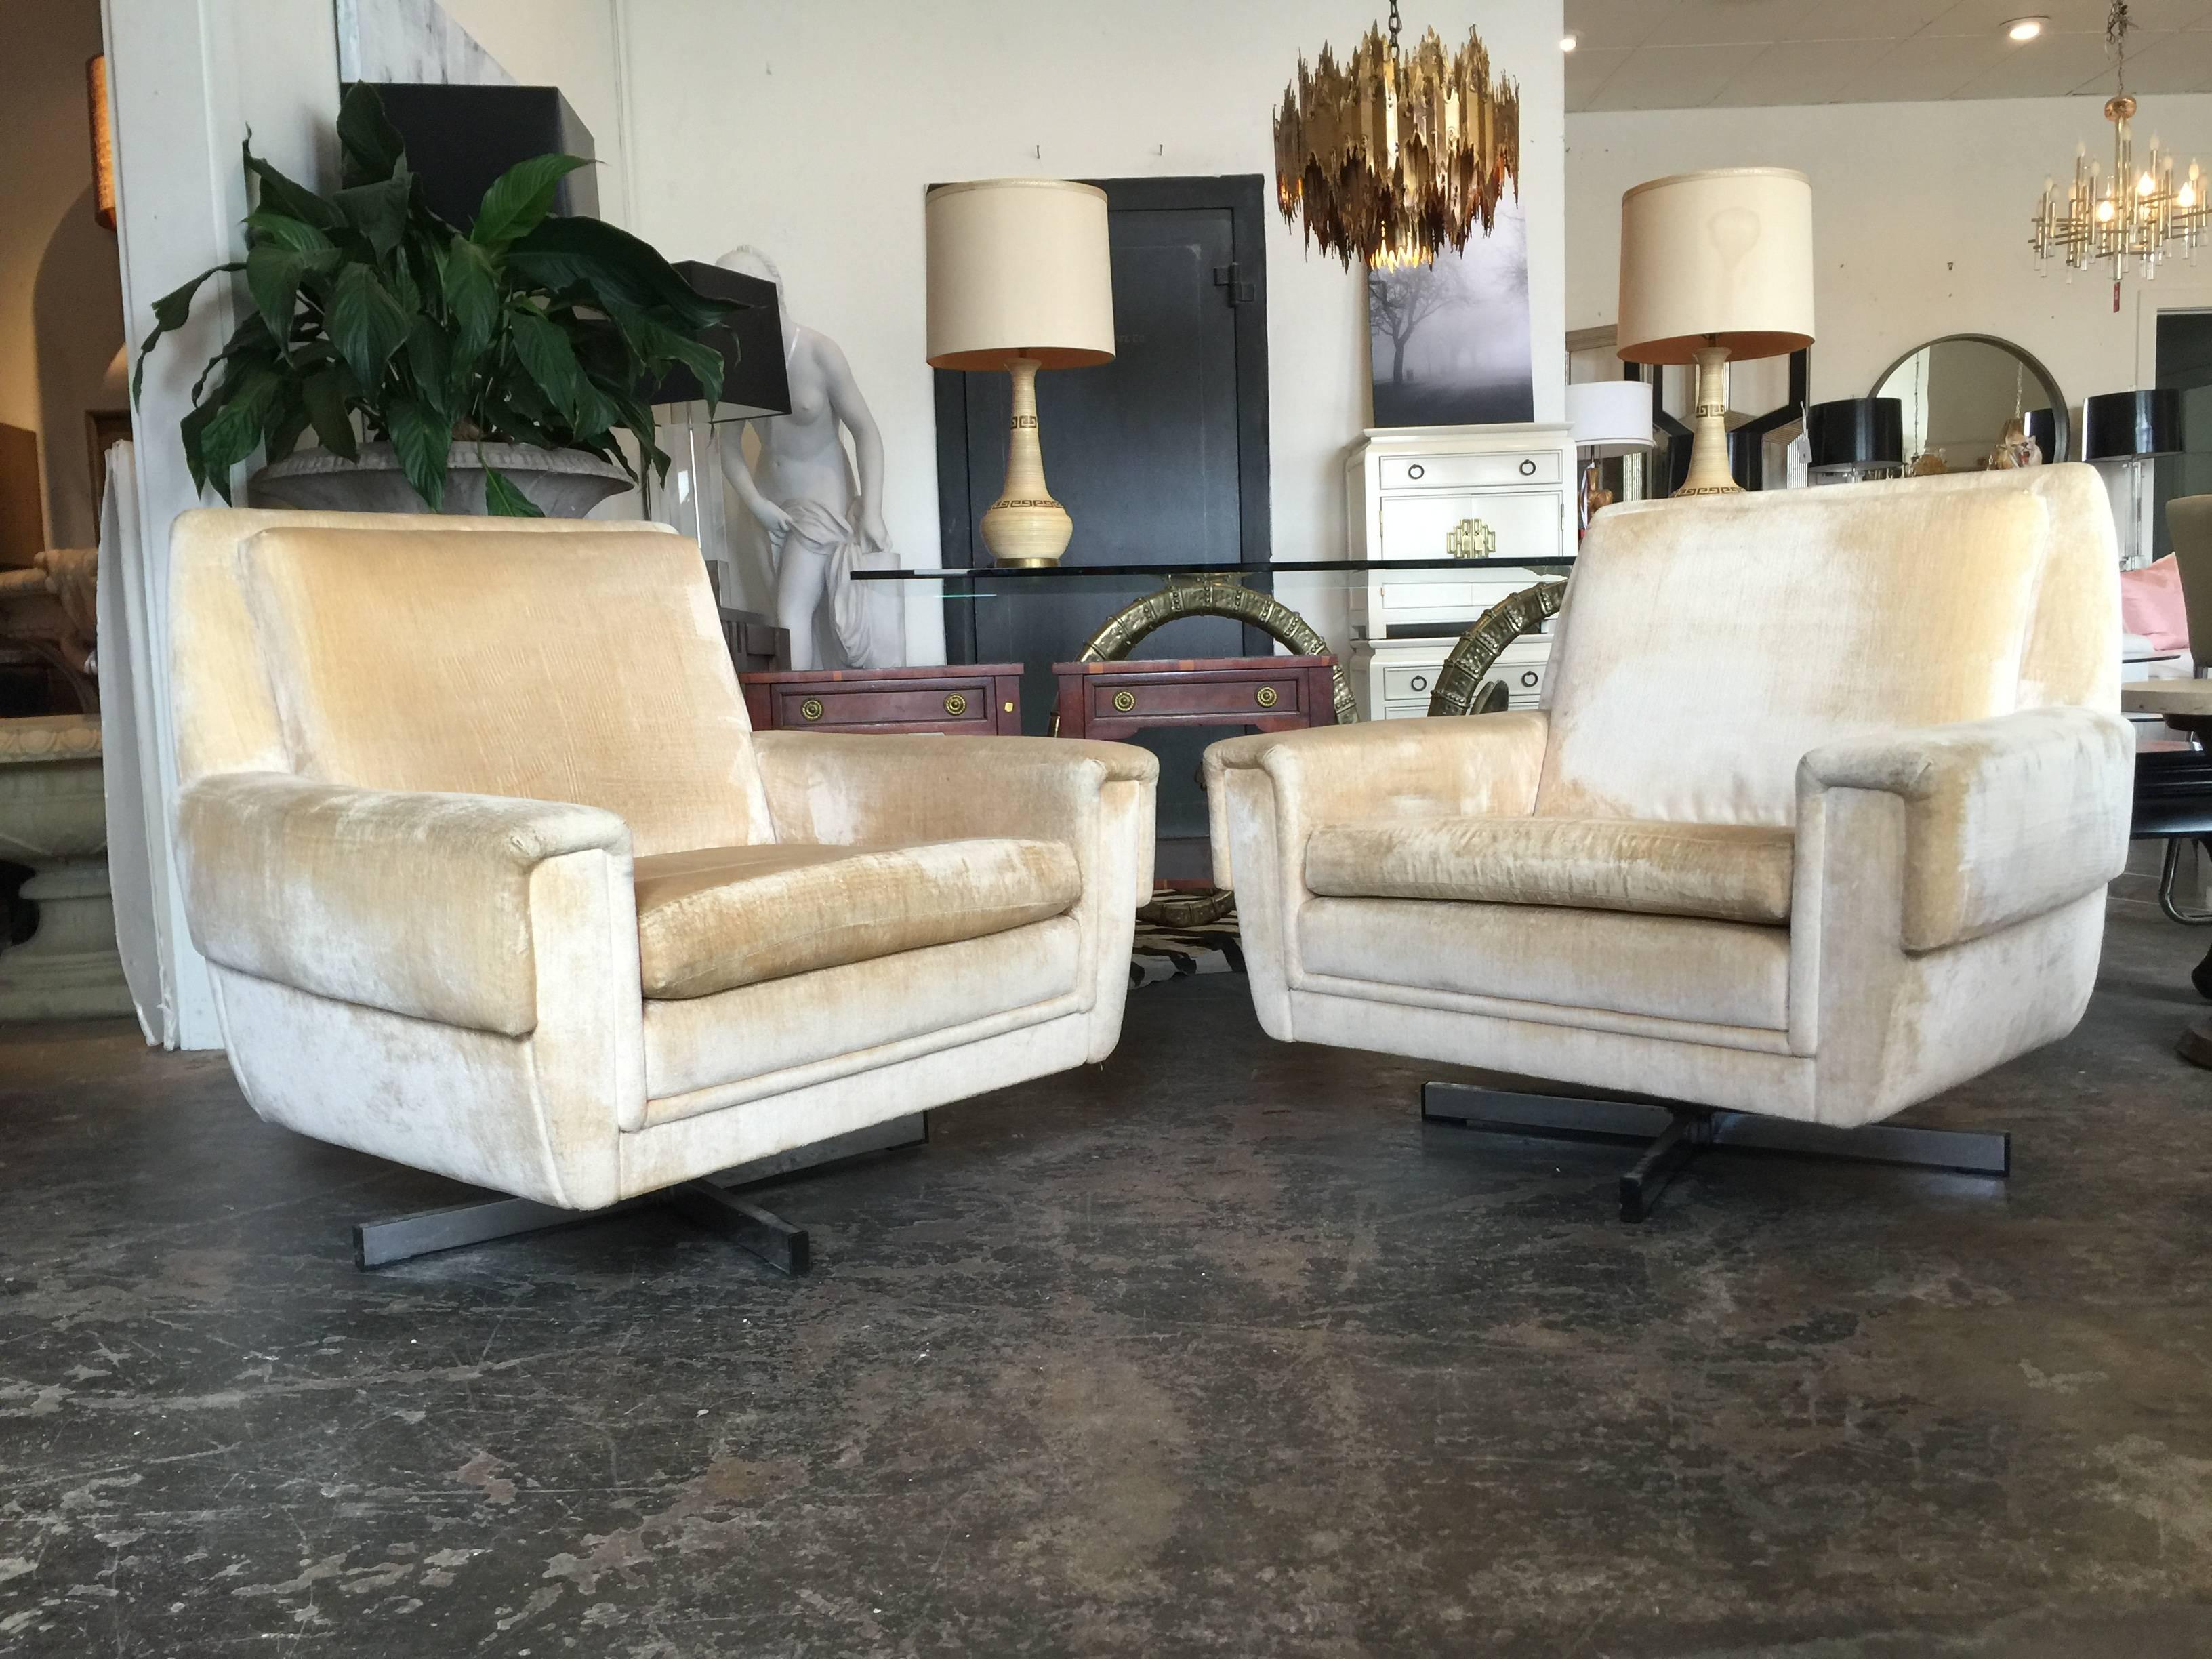 Pair of minimal cubist 1960s swivel chairs with chrome bases.

Dimensions: 34